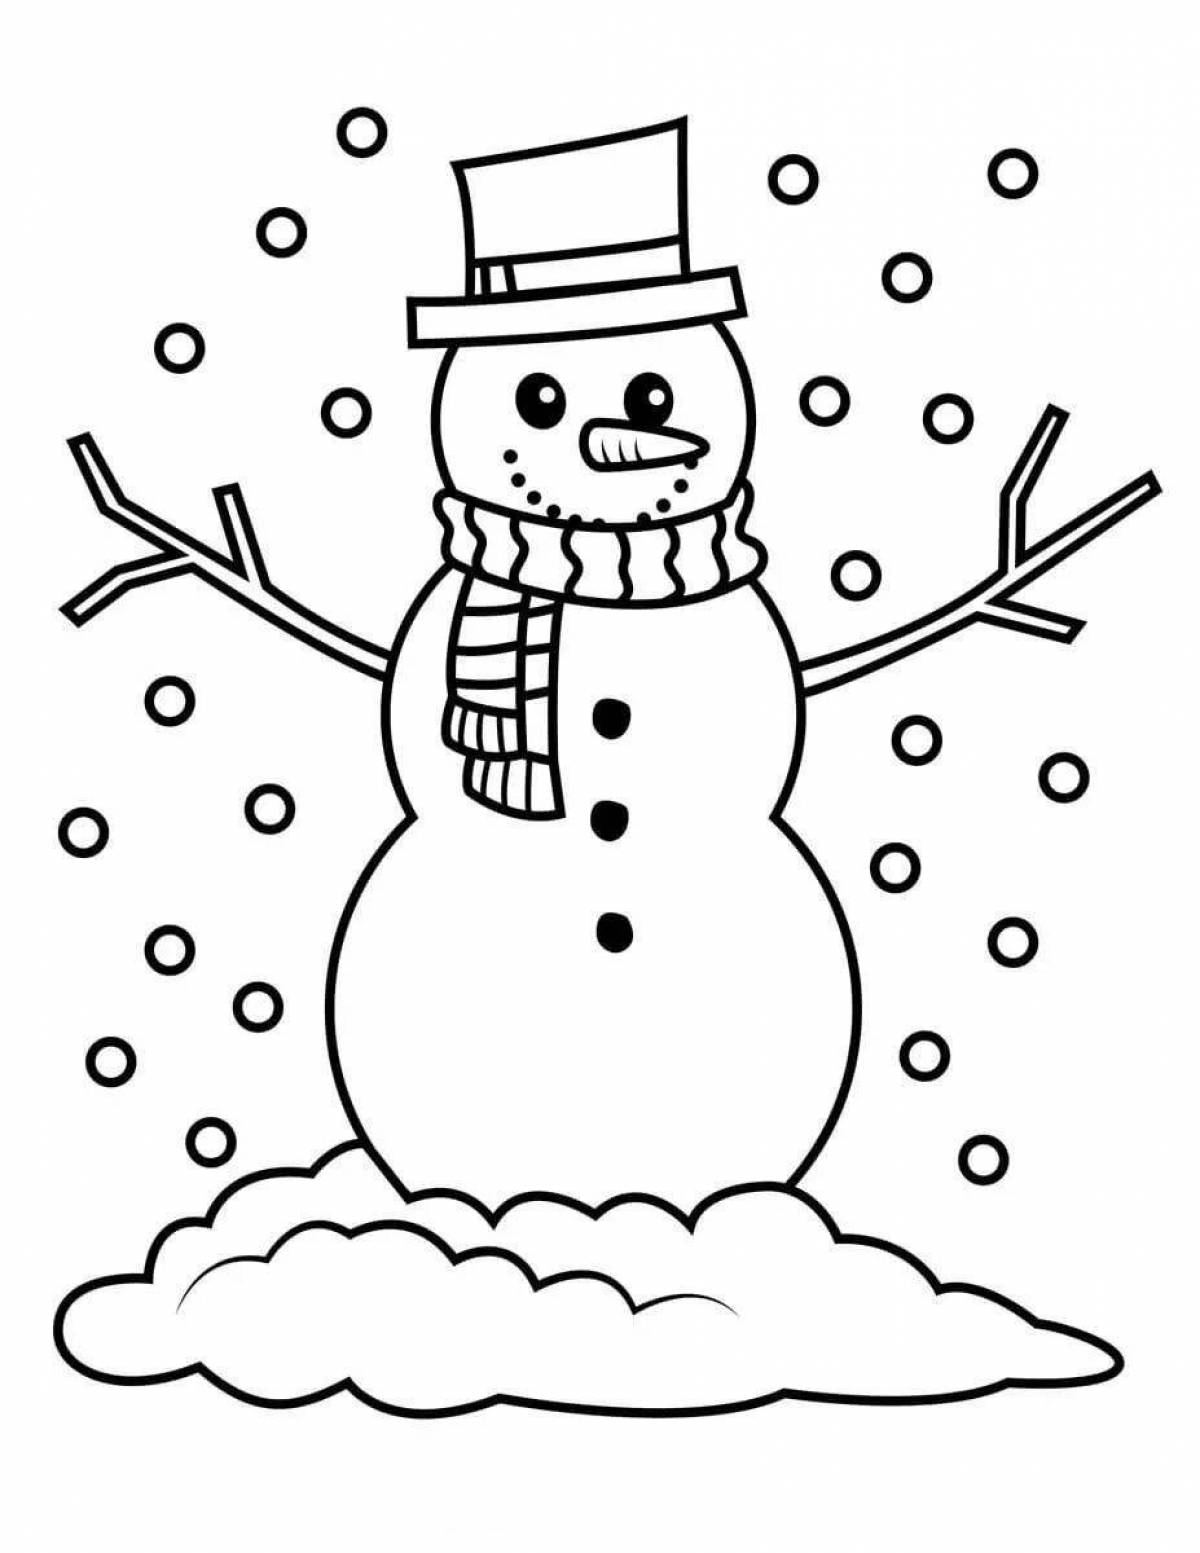 Coloring day of a cheerful snowman